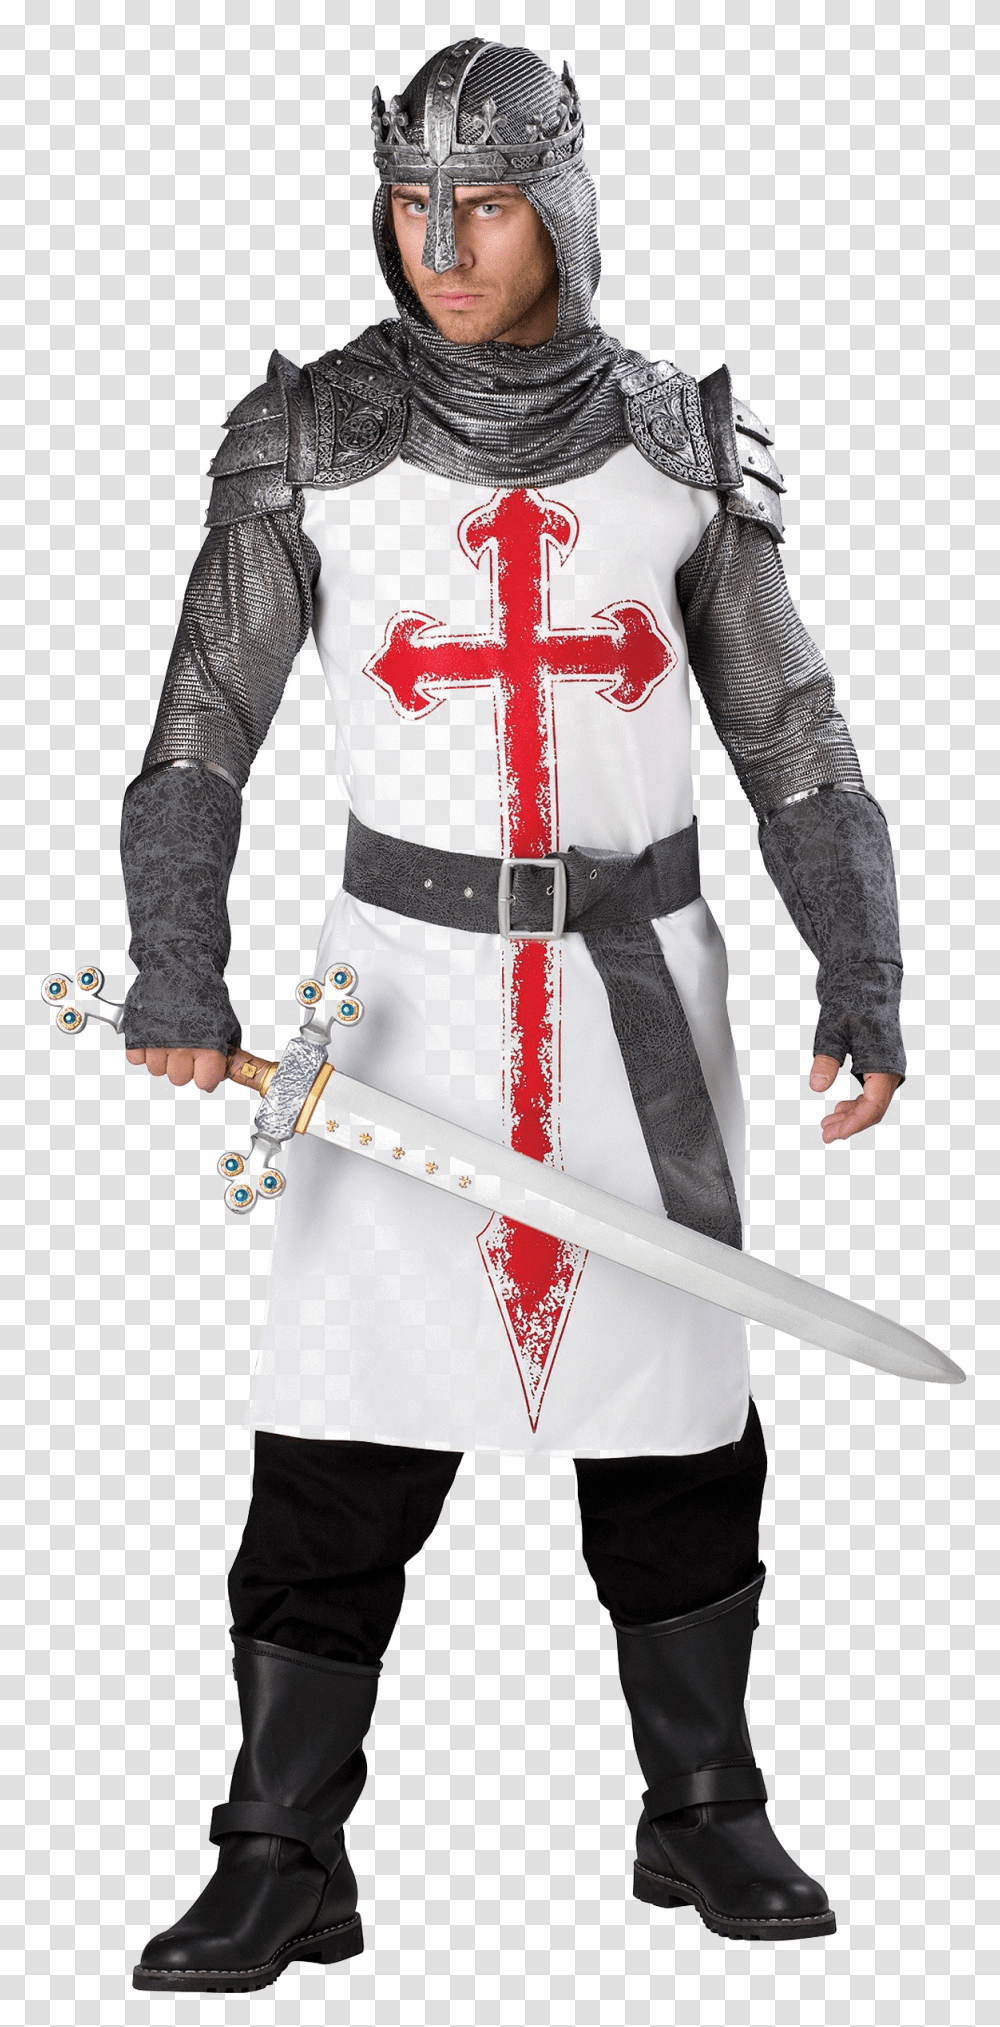 Download Hd Knight Background Image Crusader Costume, Person, Human, Long Sleeve, Clothing Transparent Png